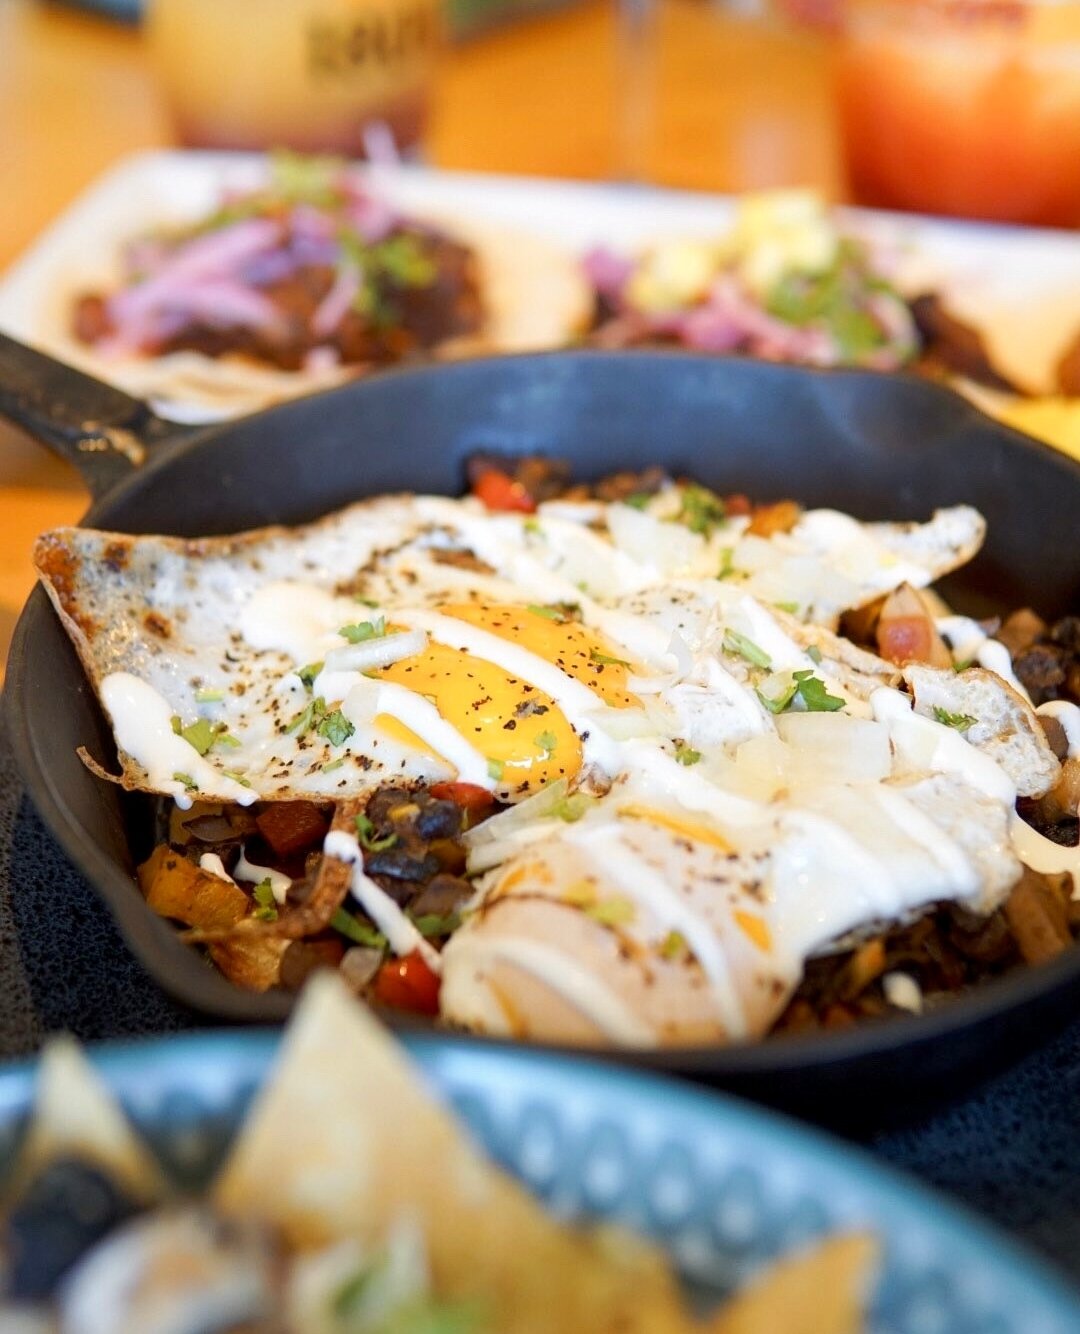 Brunch is SERVED!⁠
⁠
Our NEW brunch menu is live - you don't wanna miss it! Pictured here: our Skillet Huevos Rancheros 🍳 Classic huevos rancheros layered with beans, veggies, and cheese. ⁠
⁠
@eatswitheva⁠
⁠
#Brunch #Vancouver #VancouverBrunch #Vanc